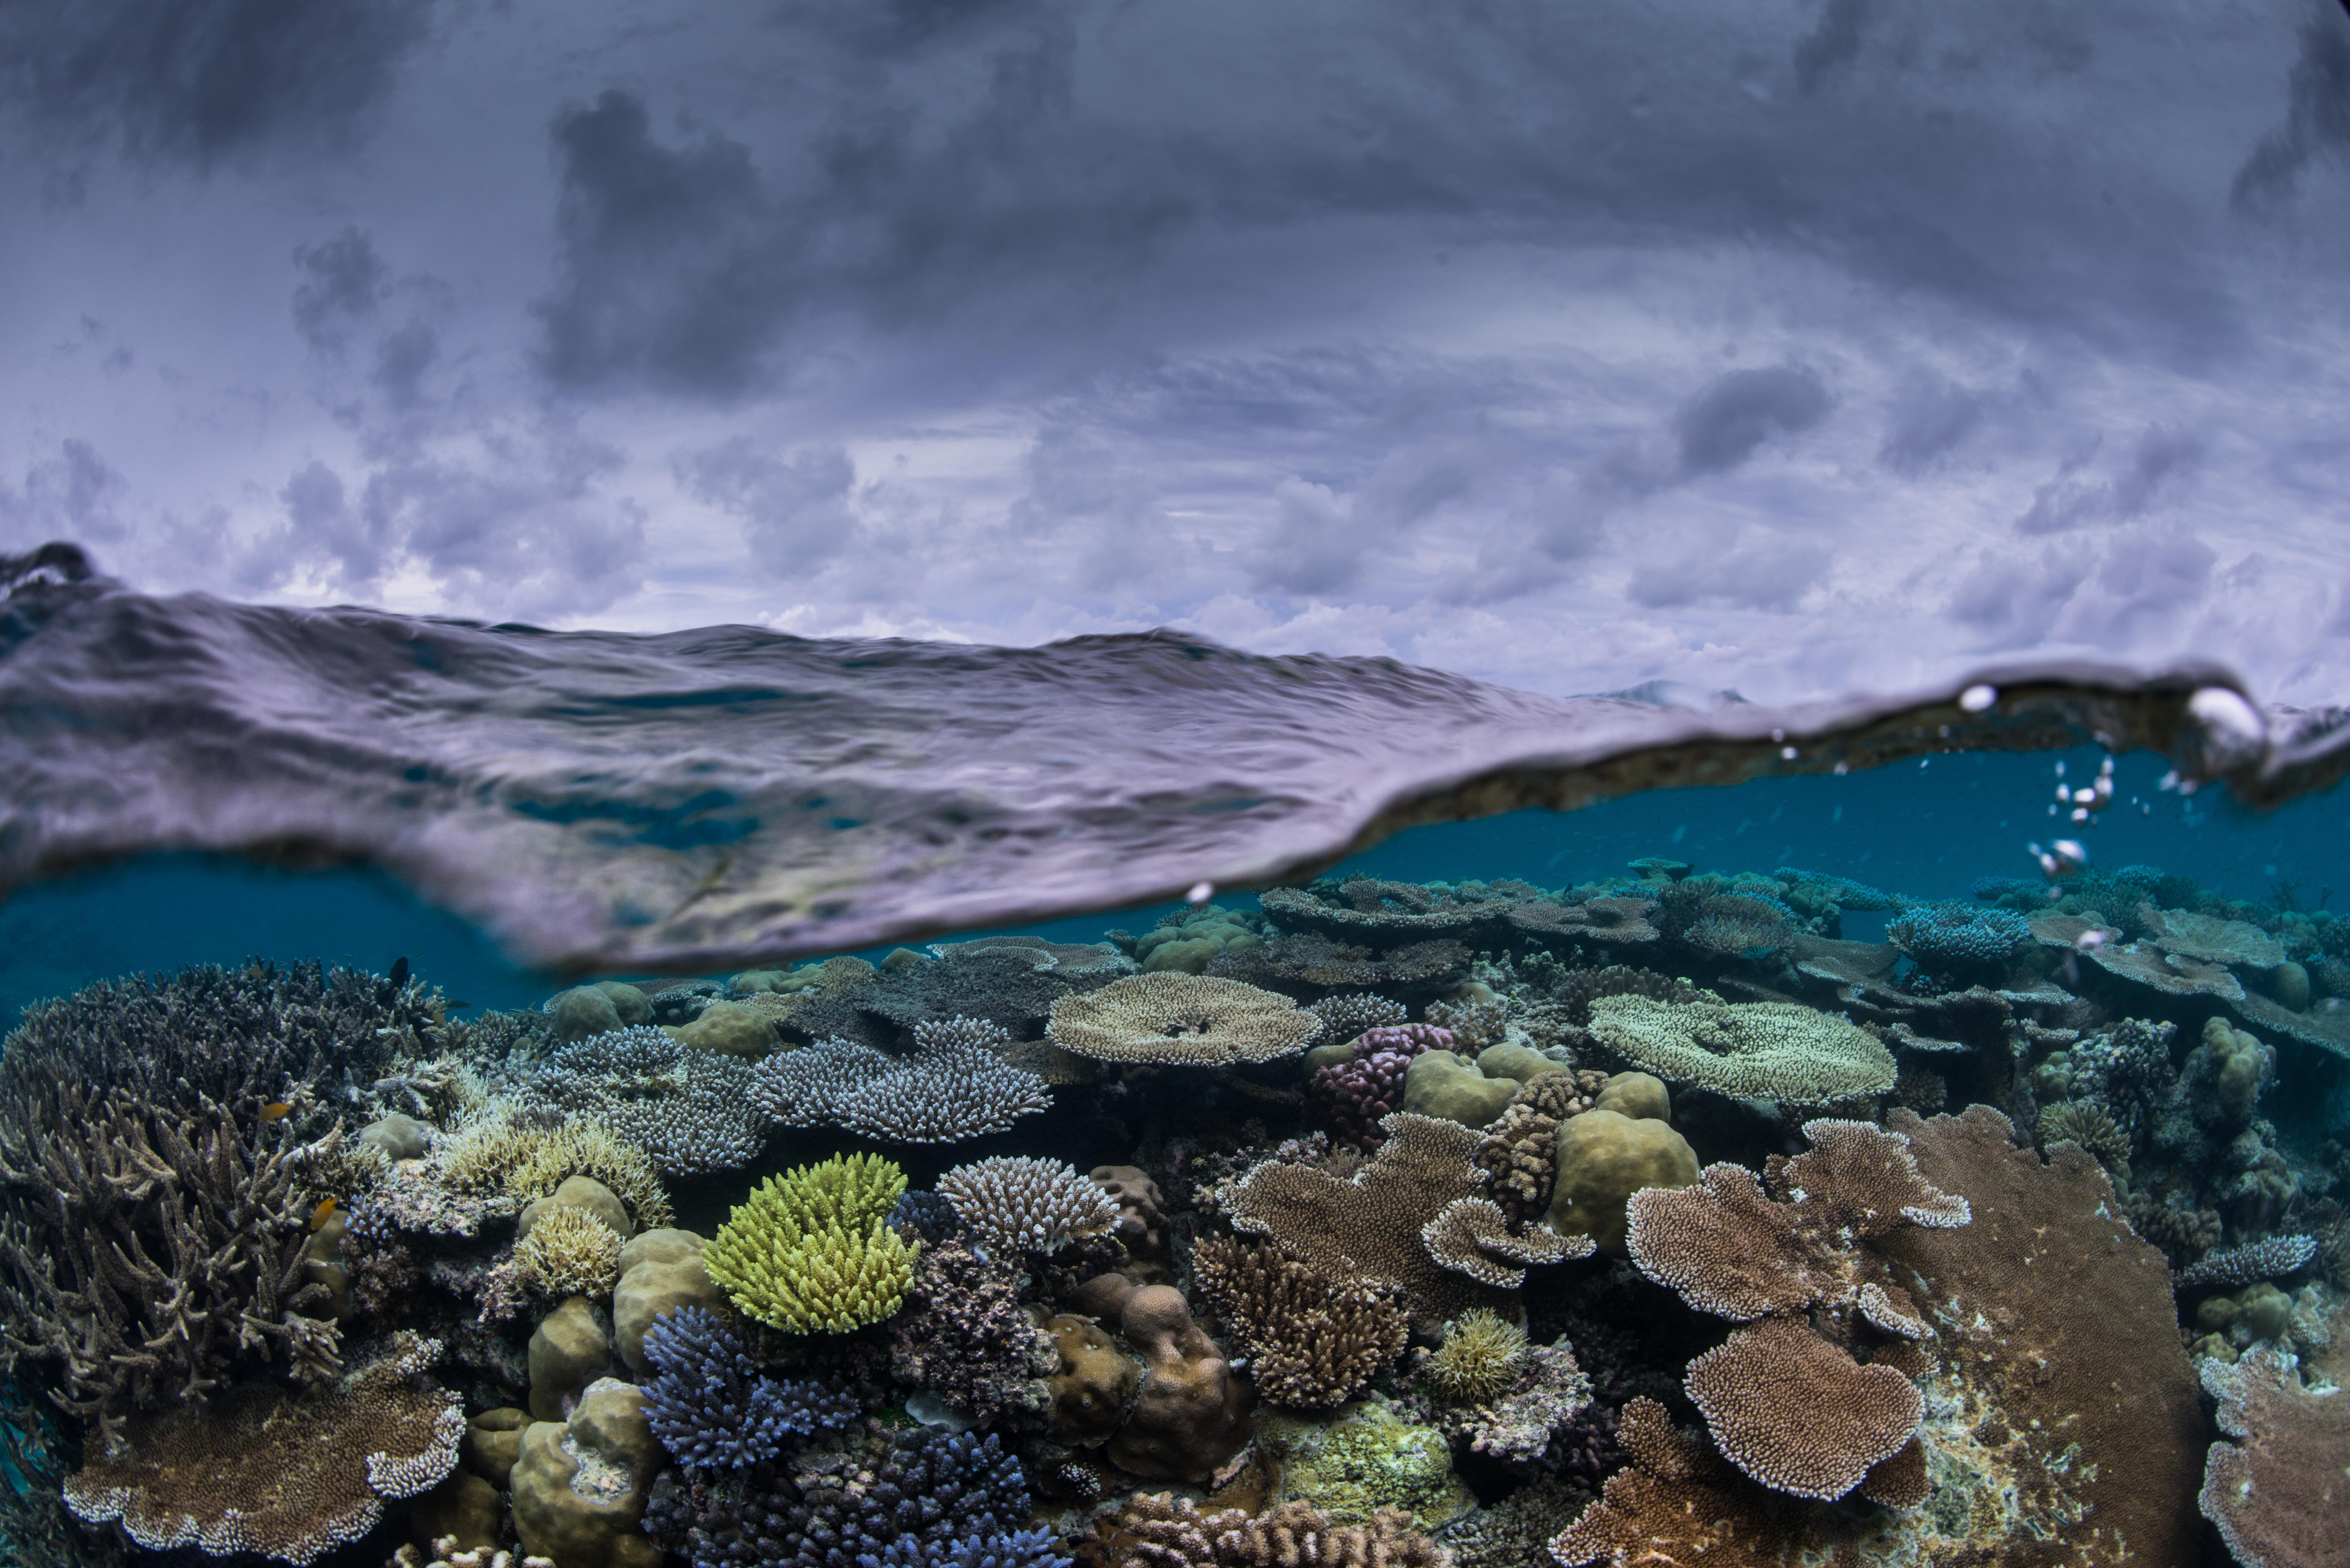 A split view of above and under water, showing sky and clouds above and a coral reef below the water's surface.